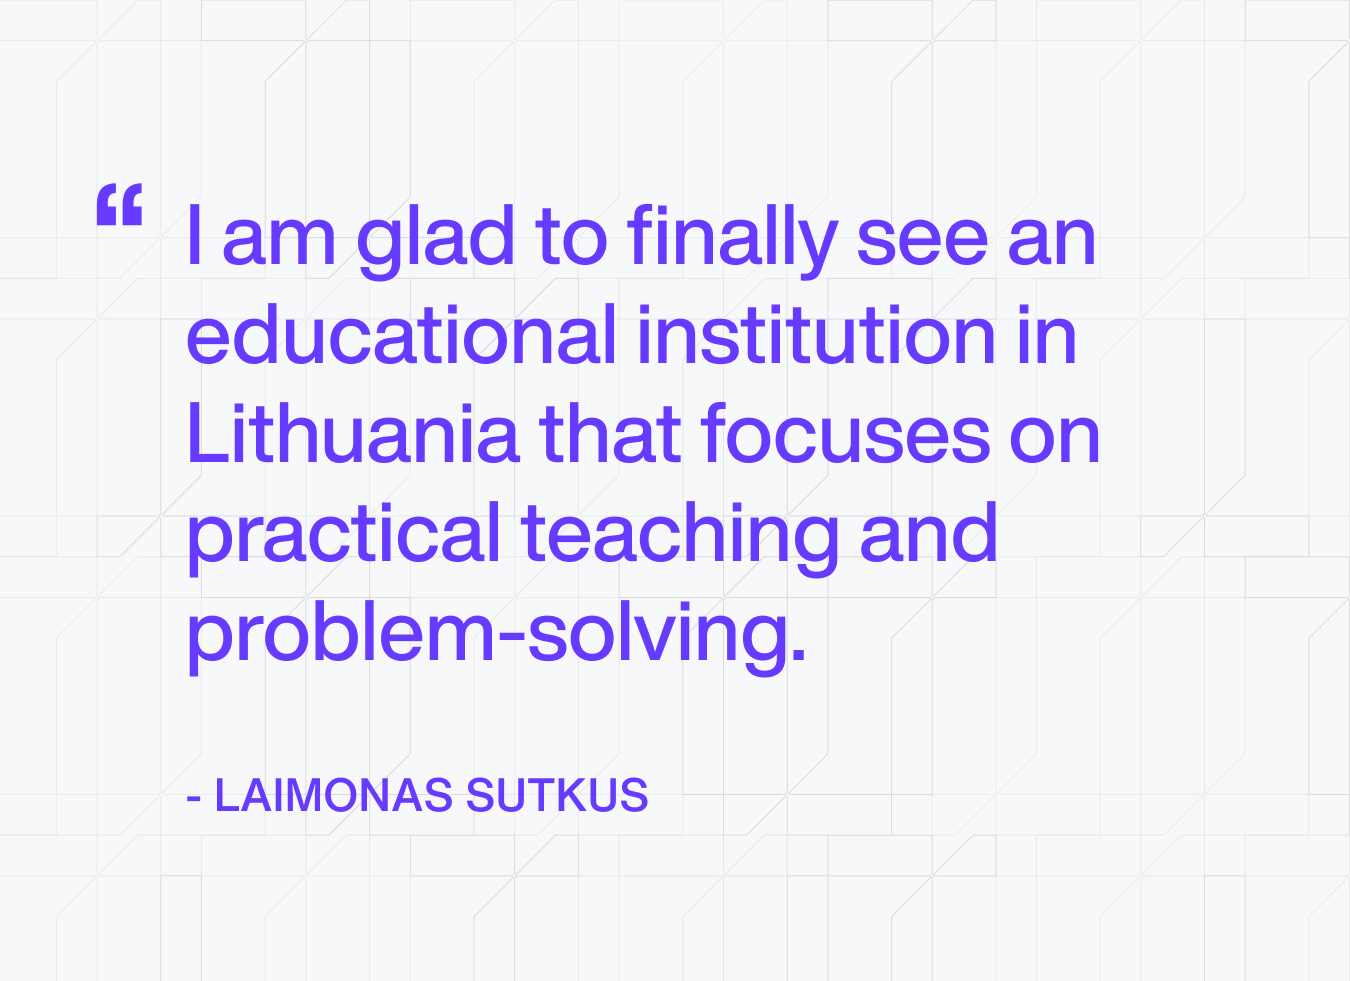 Quote from Laimonas Sutkus about Turing College